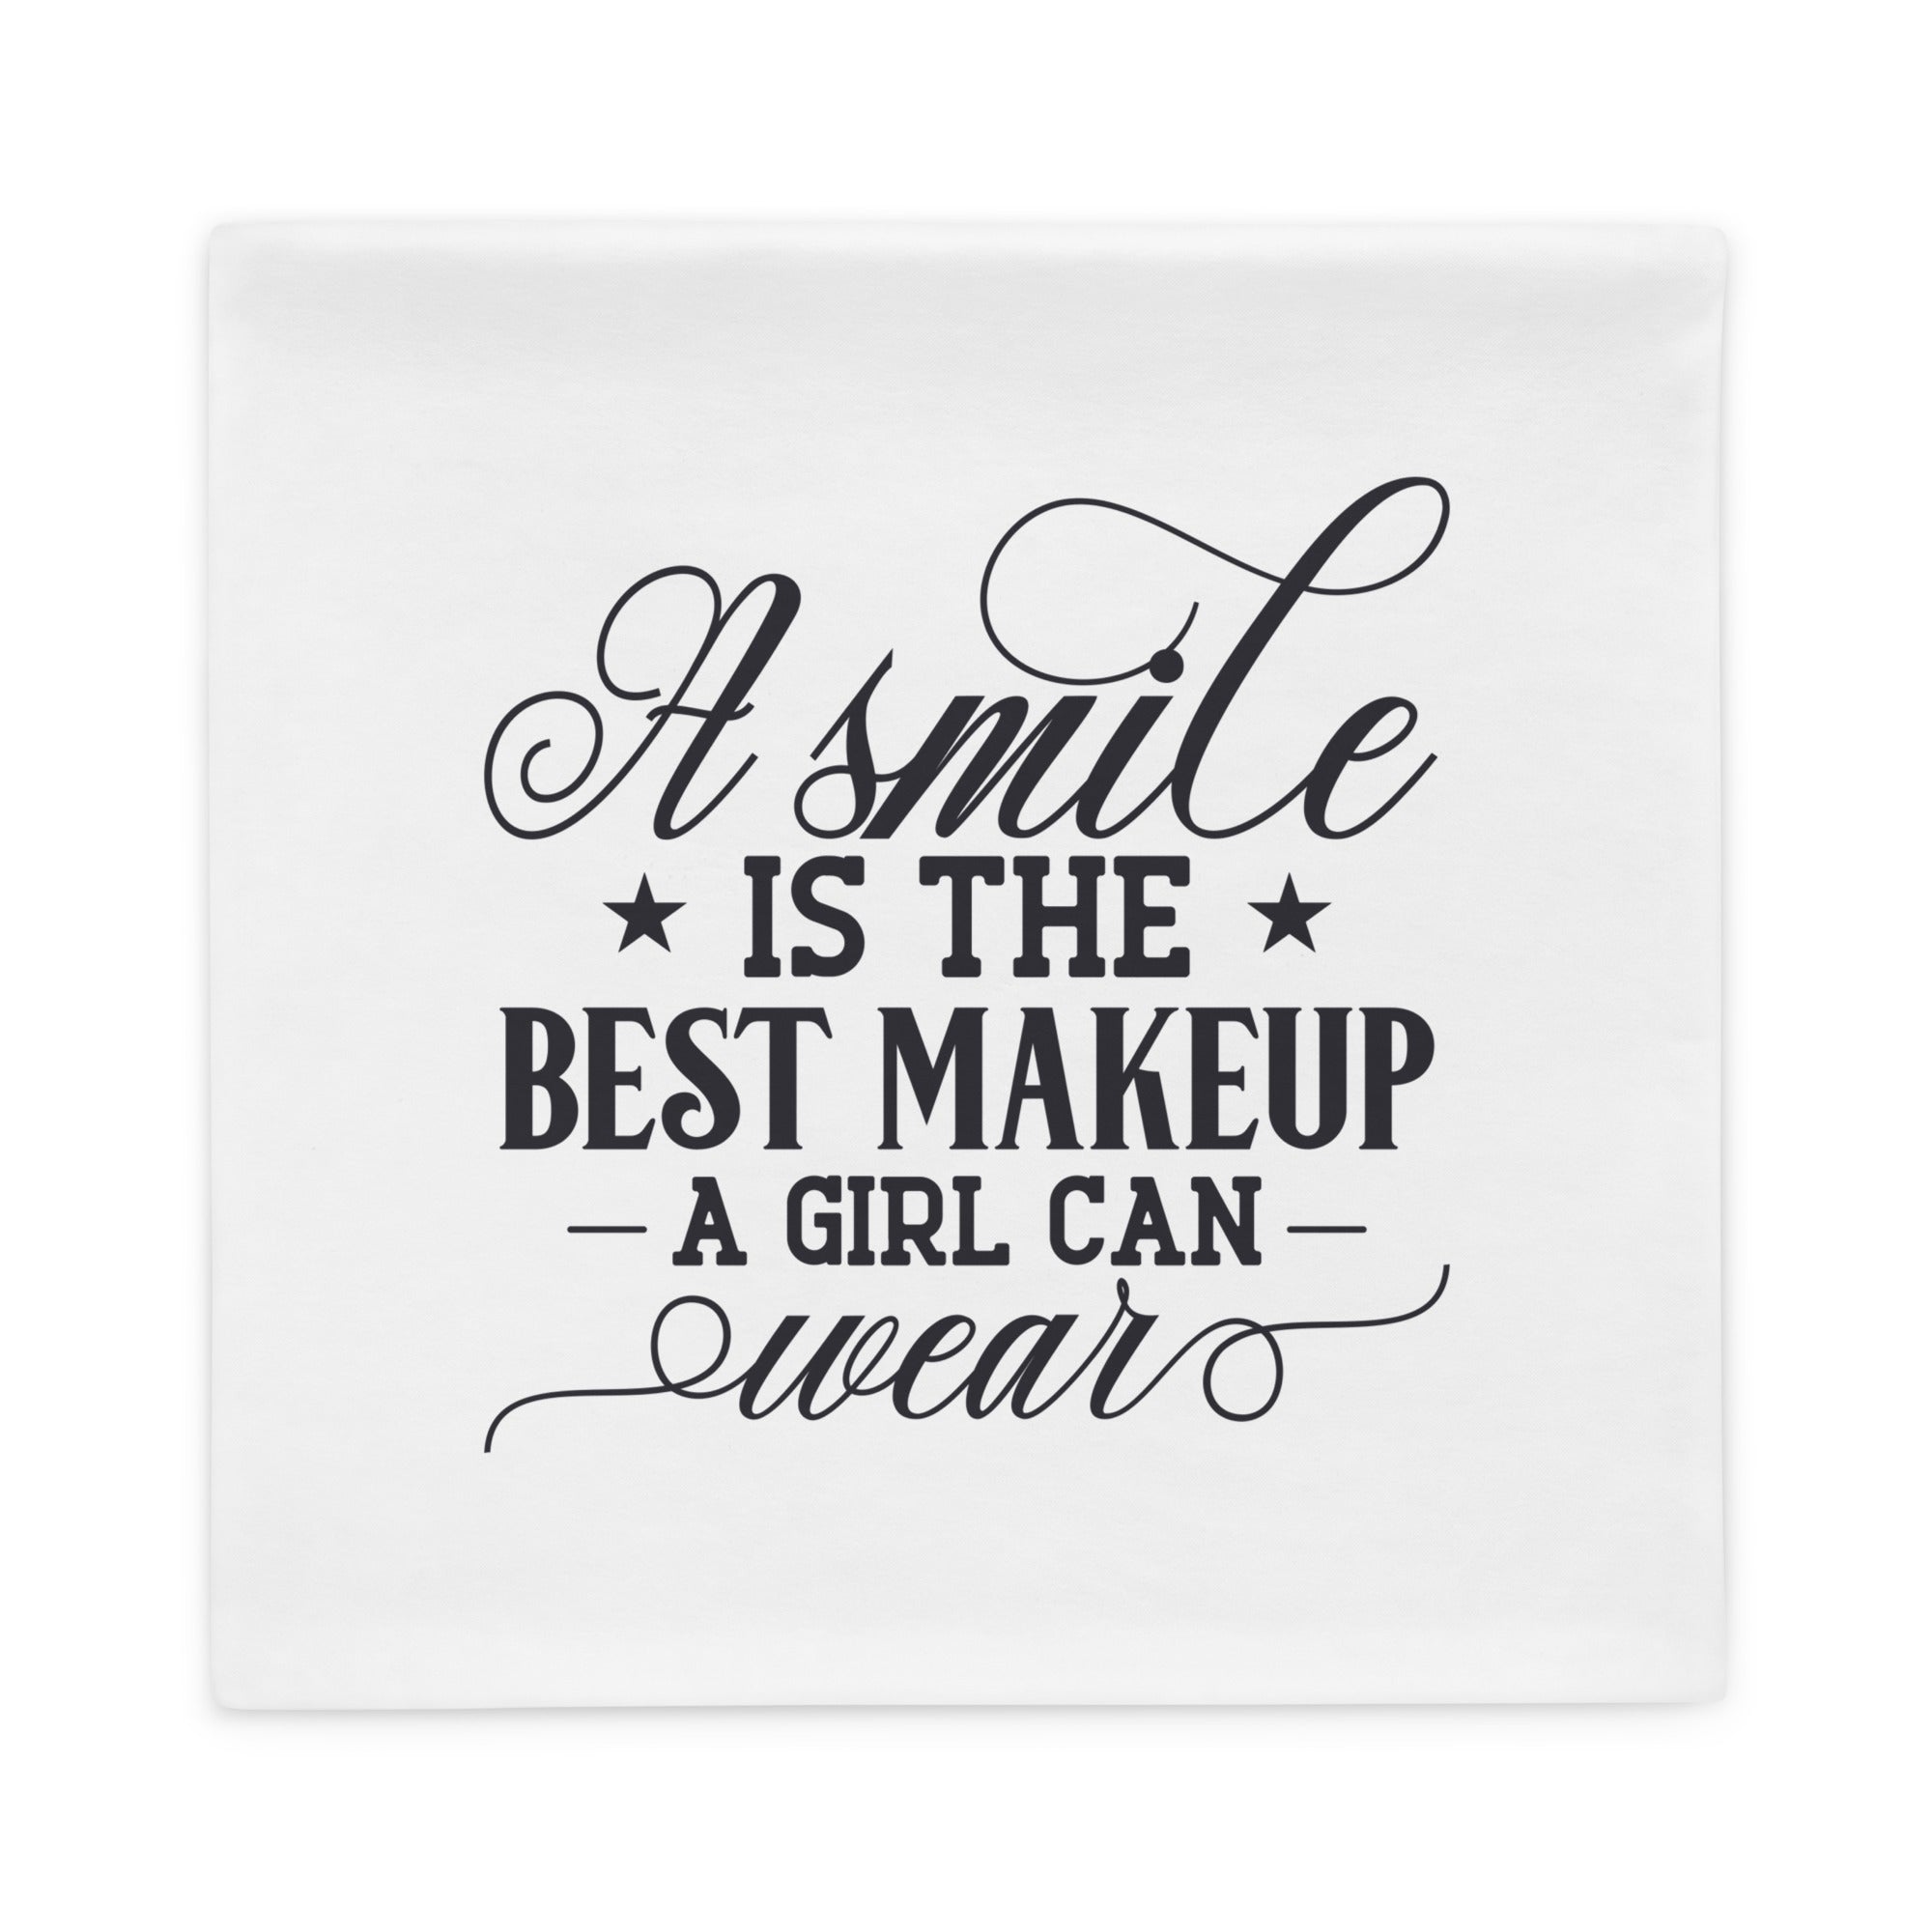 A Smile Is The Best Makeup - Pillow Case